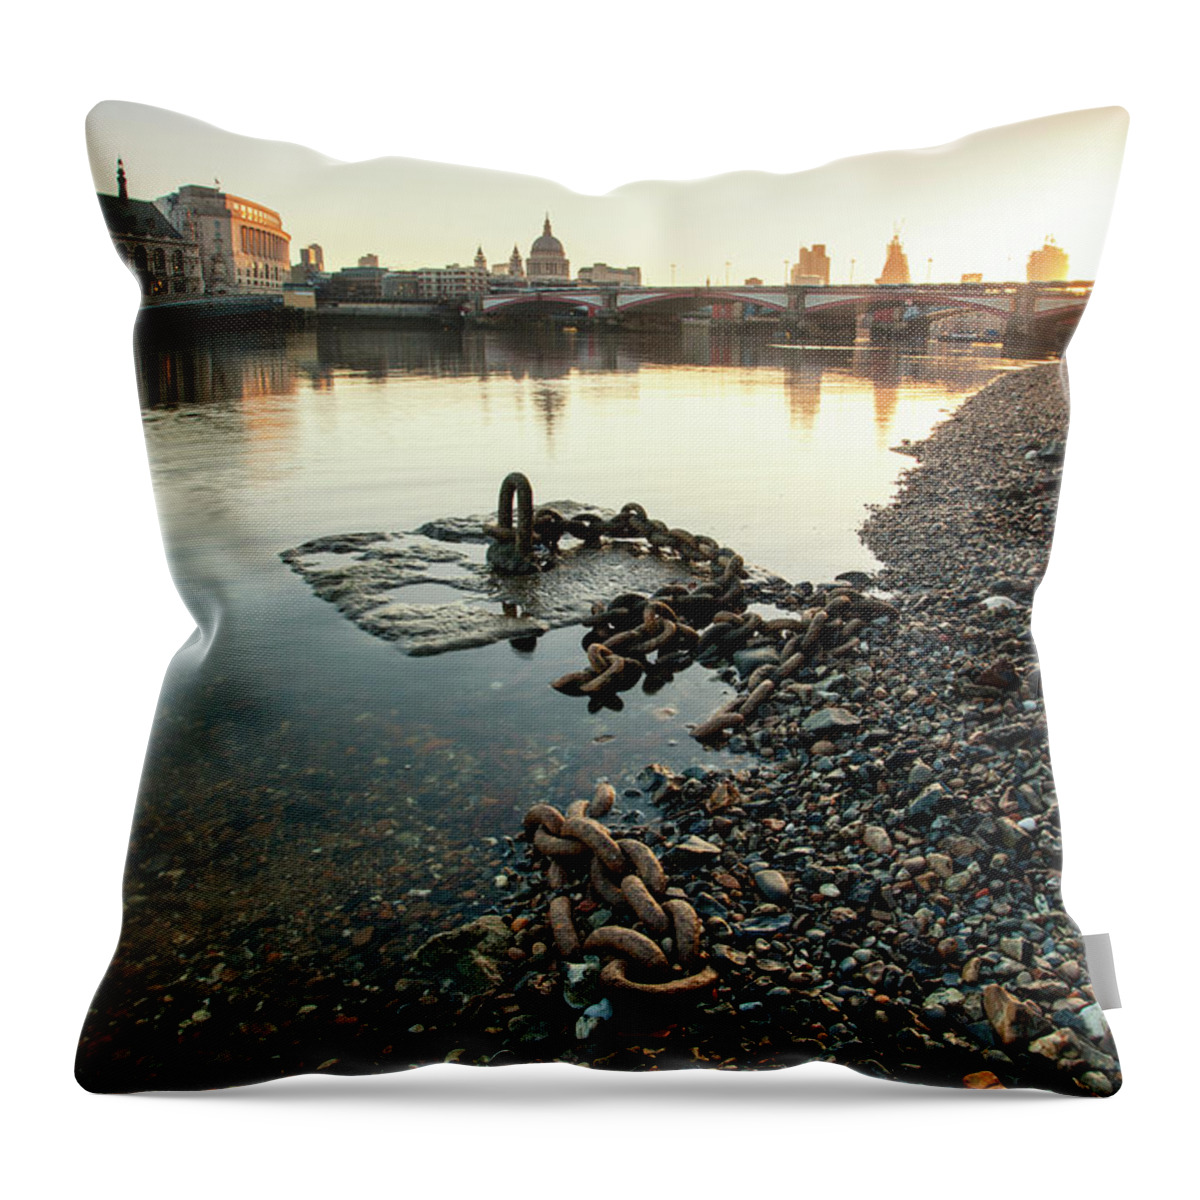 Scenics Throw Pillow featuring the photograph Draining The Thames by Ray Wise